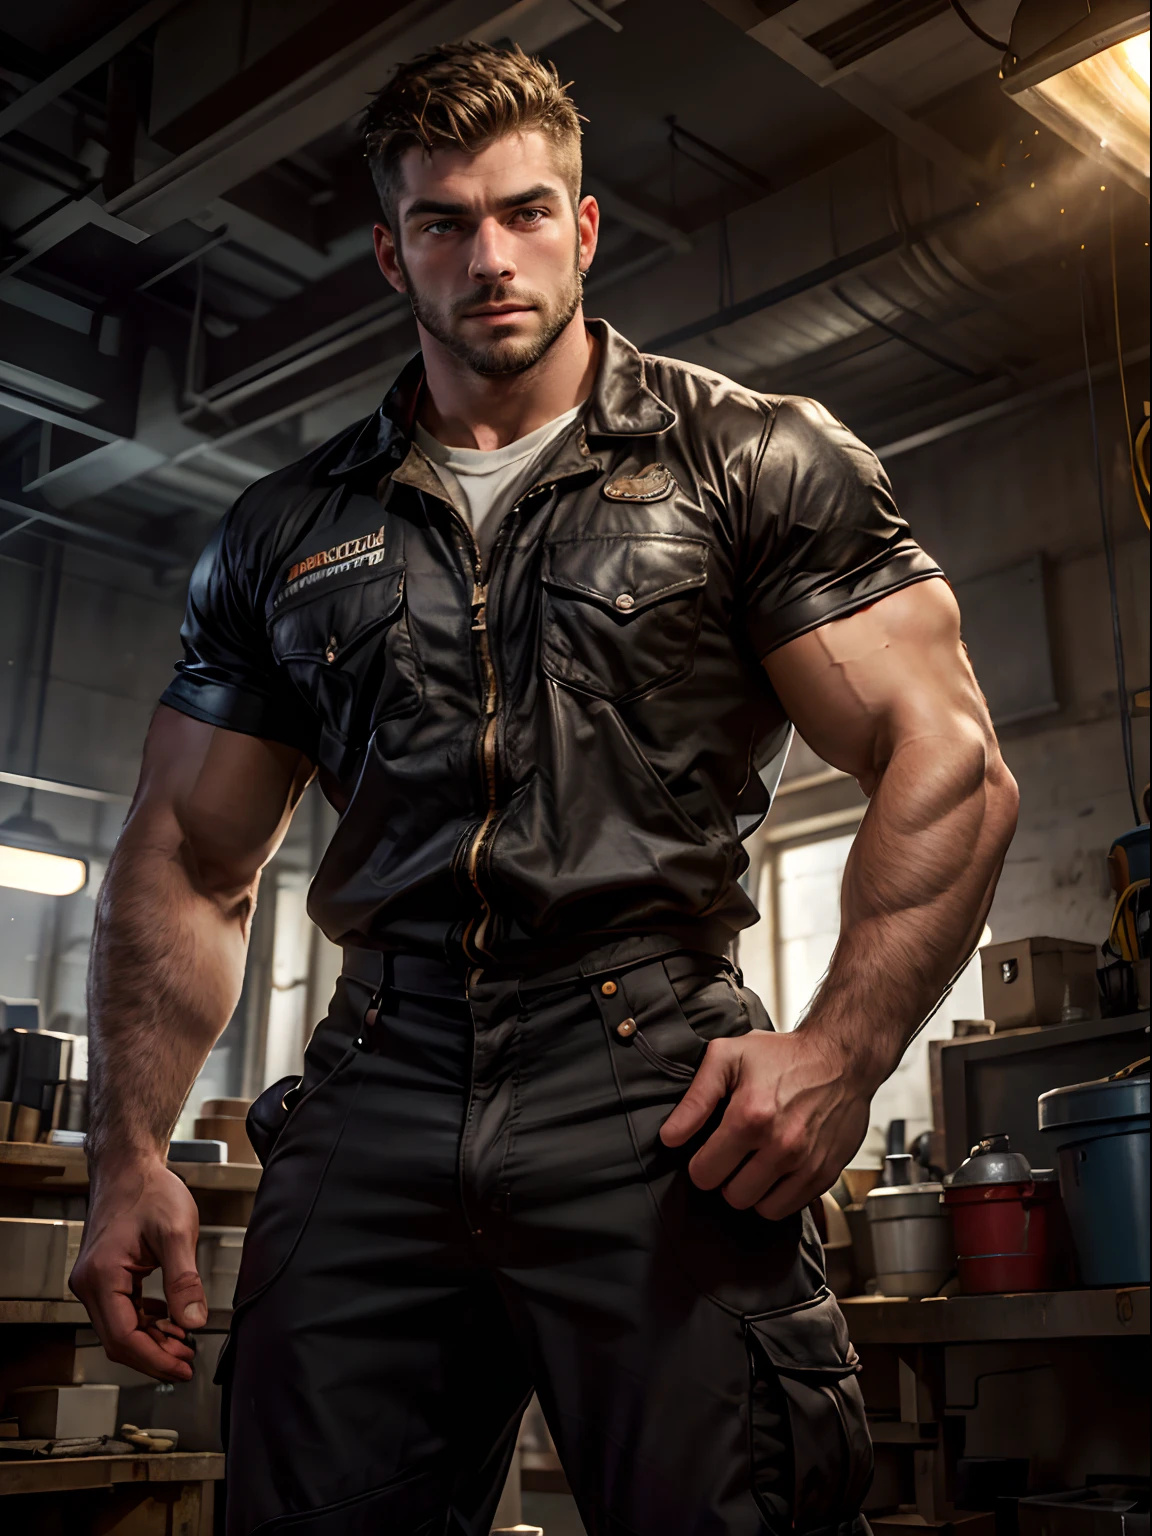 masterpiece, best quality, high resolution, male focus, solo focus, muscular, burly, hairy, male, a handsome man, mechanic, mechanic's outfit, bright light, amazing composition, front view, HDR, volumetric lighting, ultra quality, elegant, highly detailed